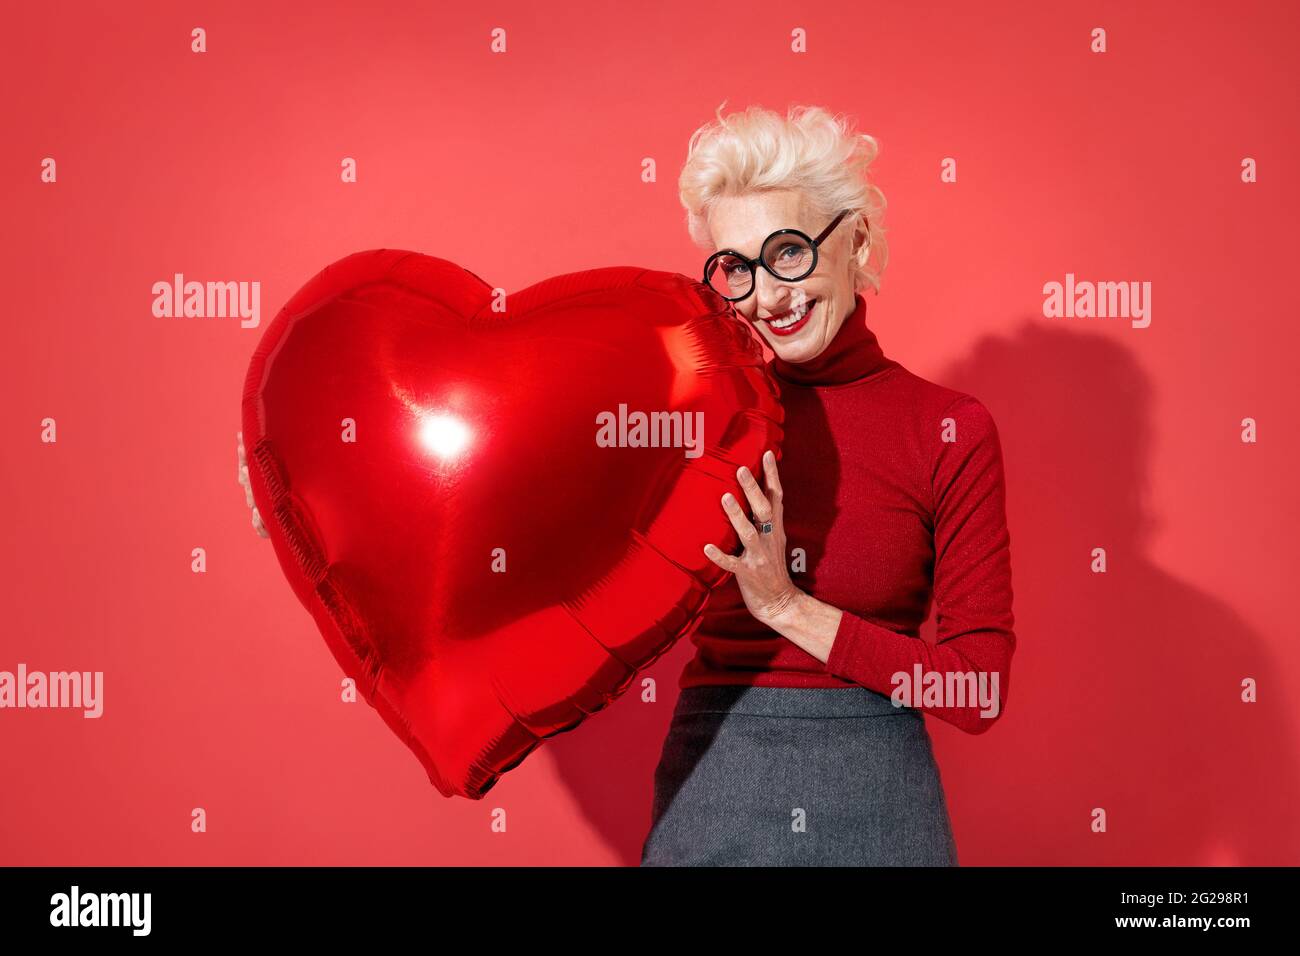 Lovely woman hugs red heart shape balloon. Photo of smiling elderly woman in love on red background. Valentine's Day Stock Photo